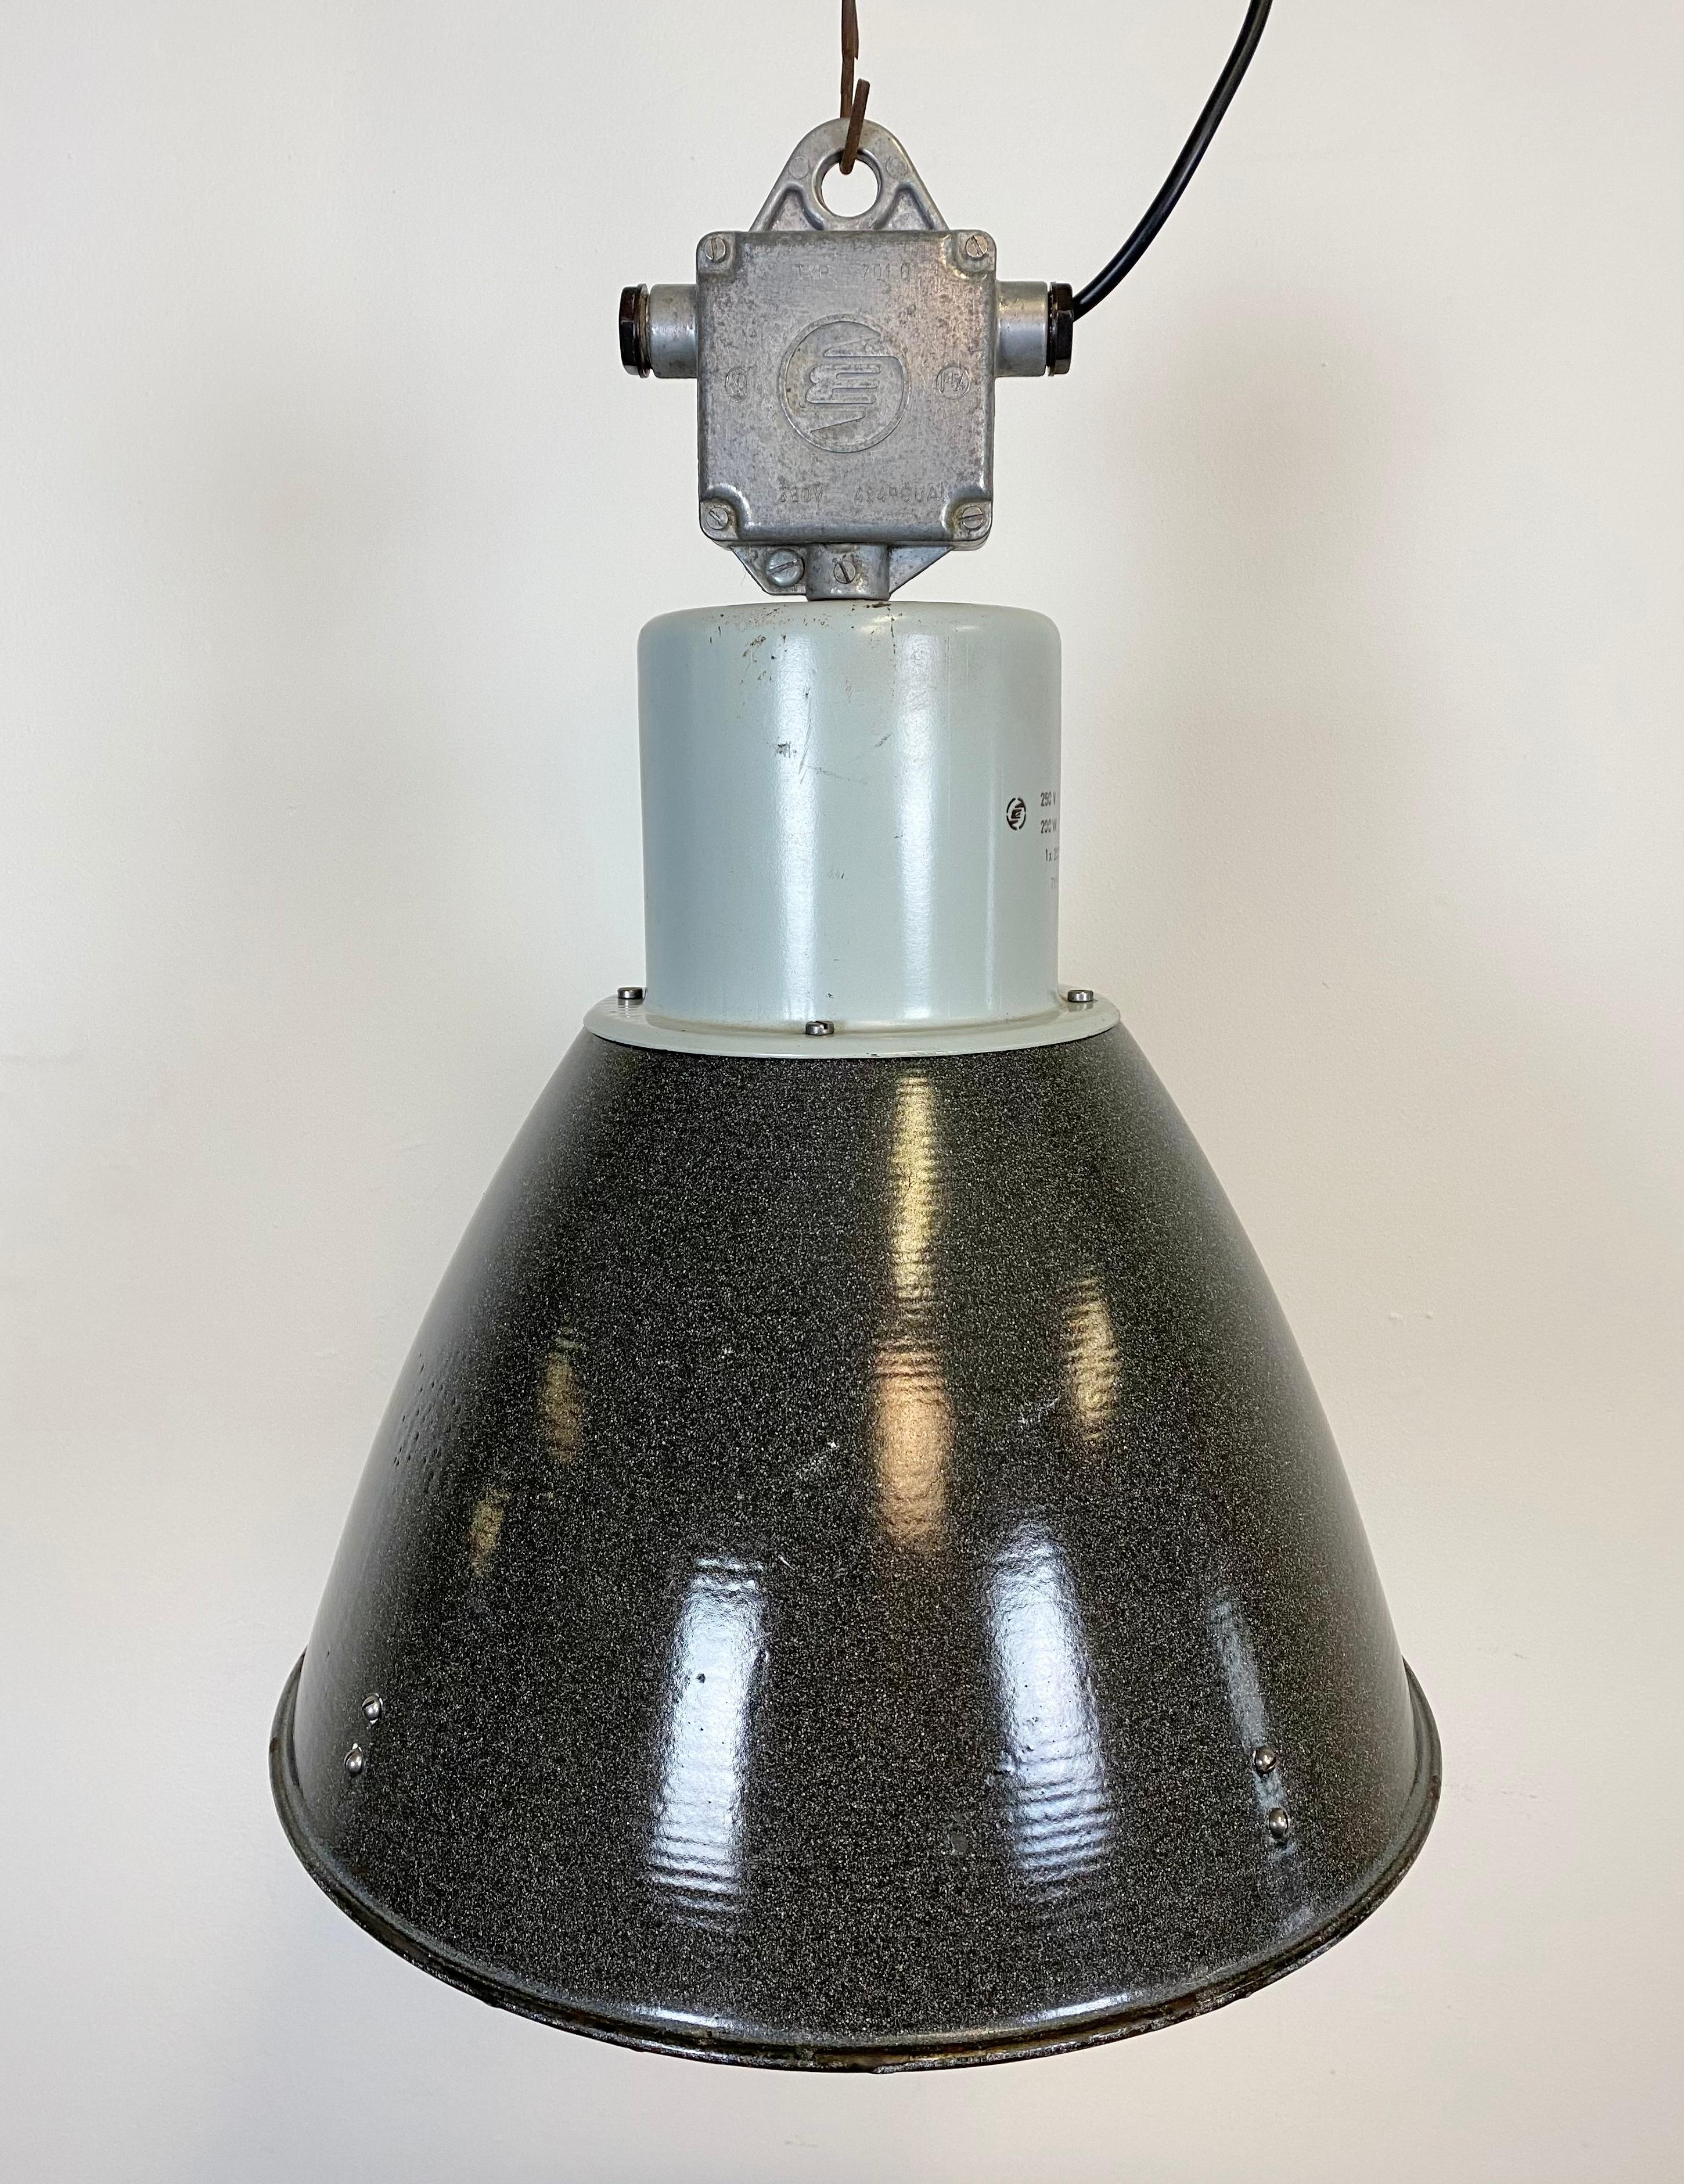 This grey enamel pendant lamp was designed in the 1960s and produced by Elektrosvit in the former Czechoslovakia. It features a grey metal top with a cast aluminium box, a dark grey enamel shade with a white enamel interior. The lamp has new